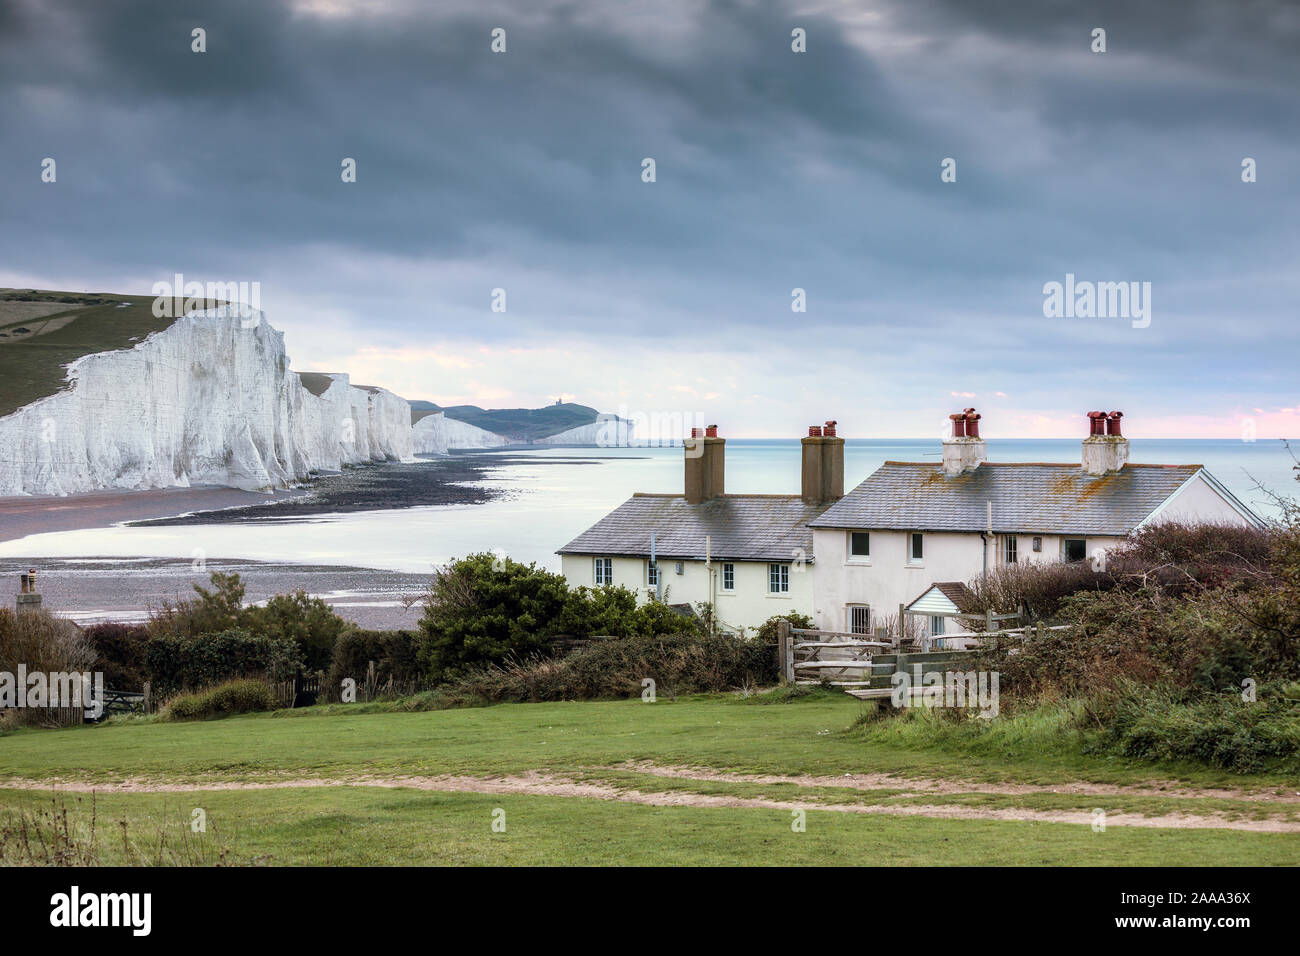 Seven Sisters chalk cliffs and Coastguard Cottages, Cuckmere Haven, Seaford Head Nature Reserve, Seaford, East Sussex, England, UK Stock Photo